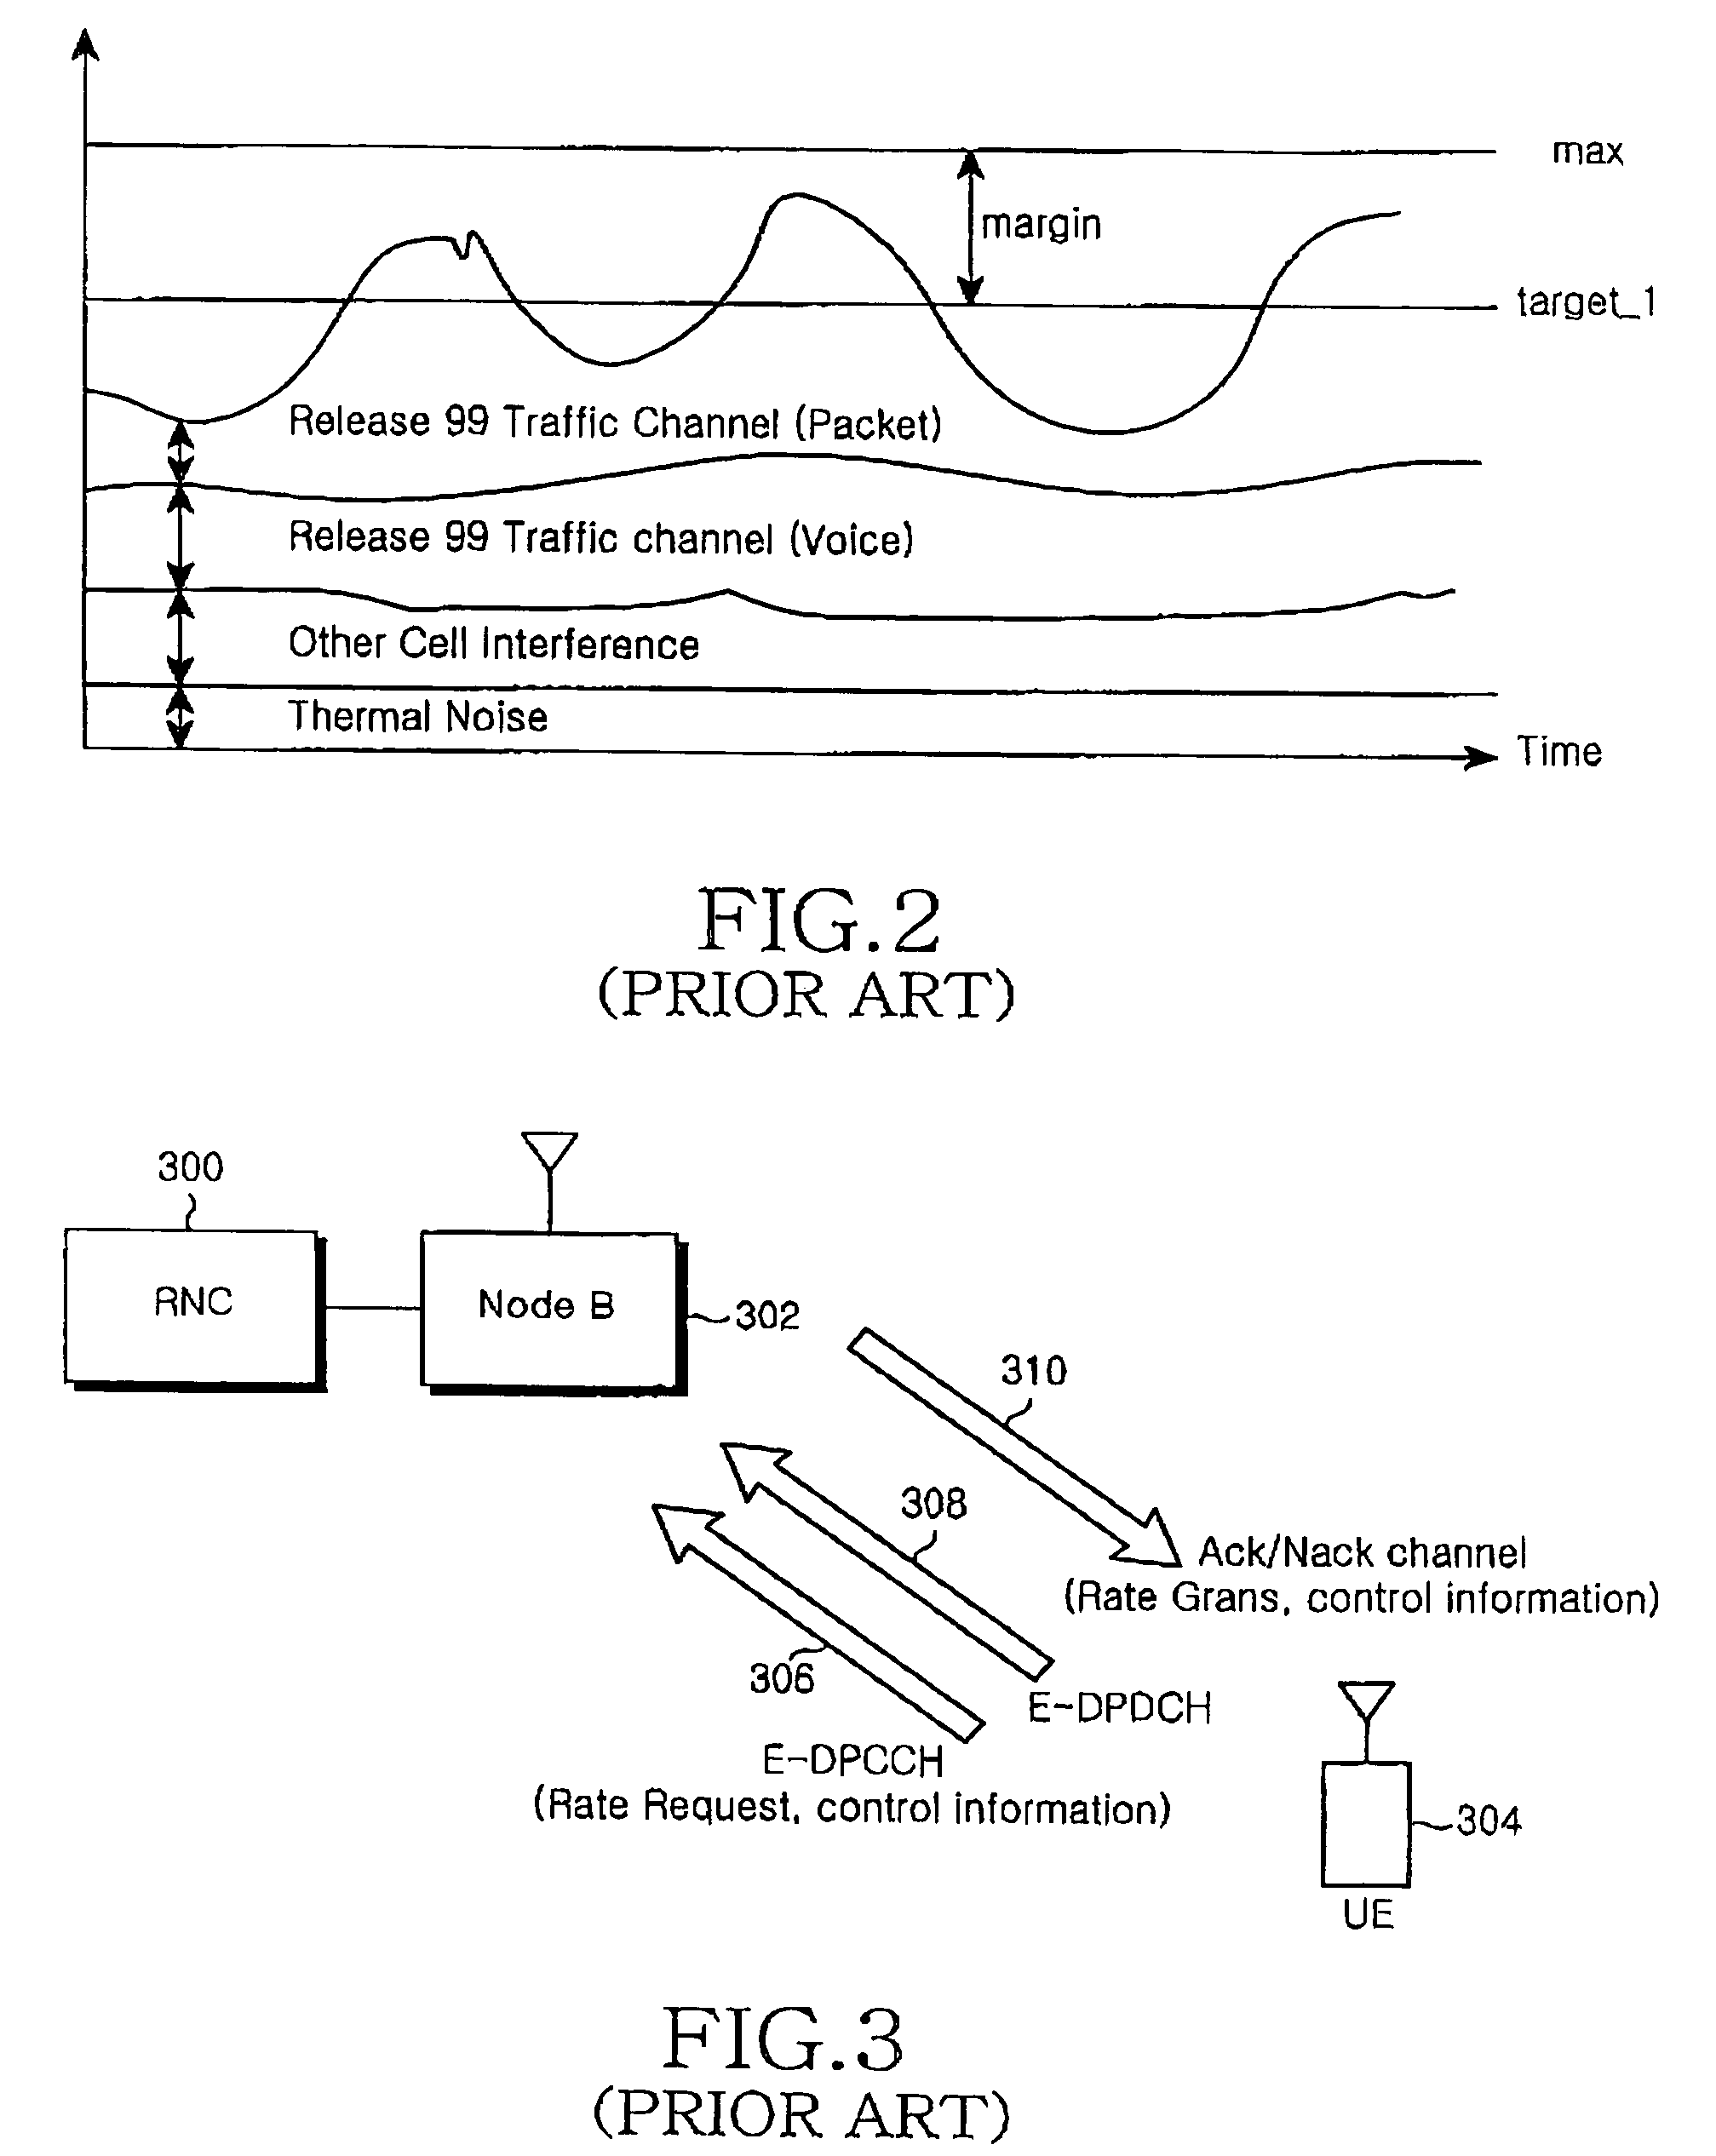 Apparatus and method for data rate scheduling of user equipment in a mobile communication system